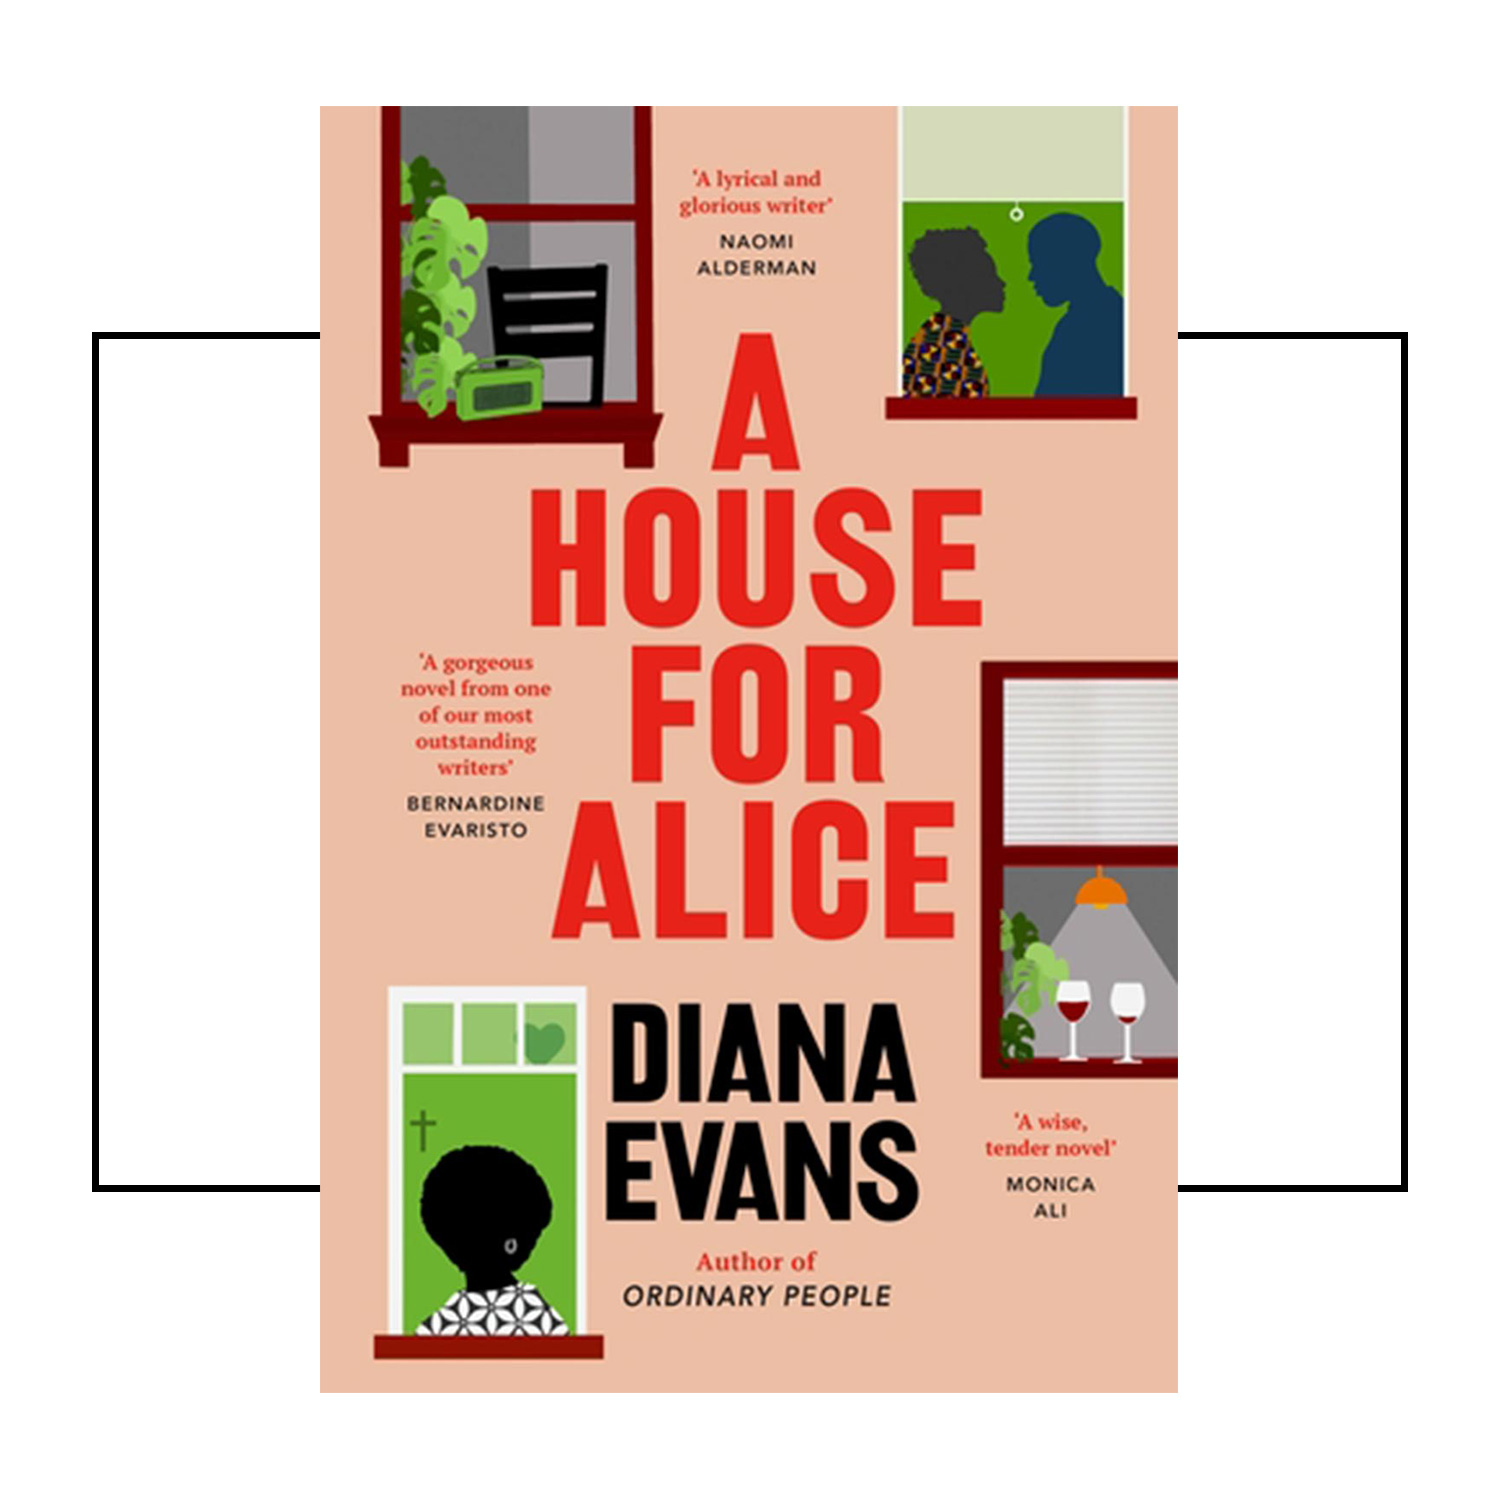 An image of the cover of A house of Alice by Diana Evans